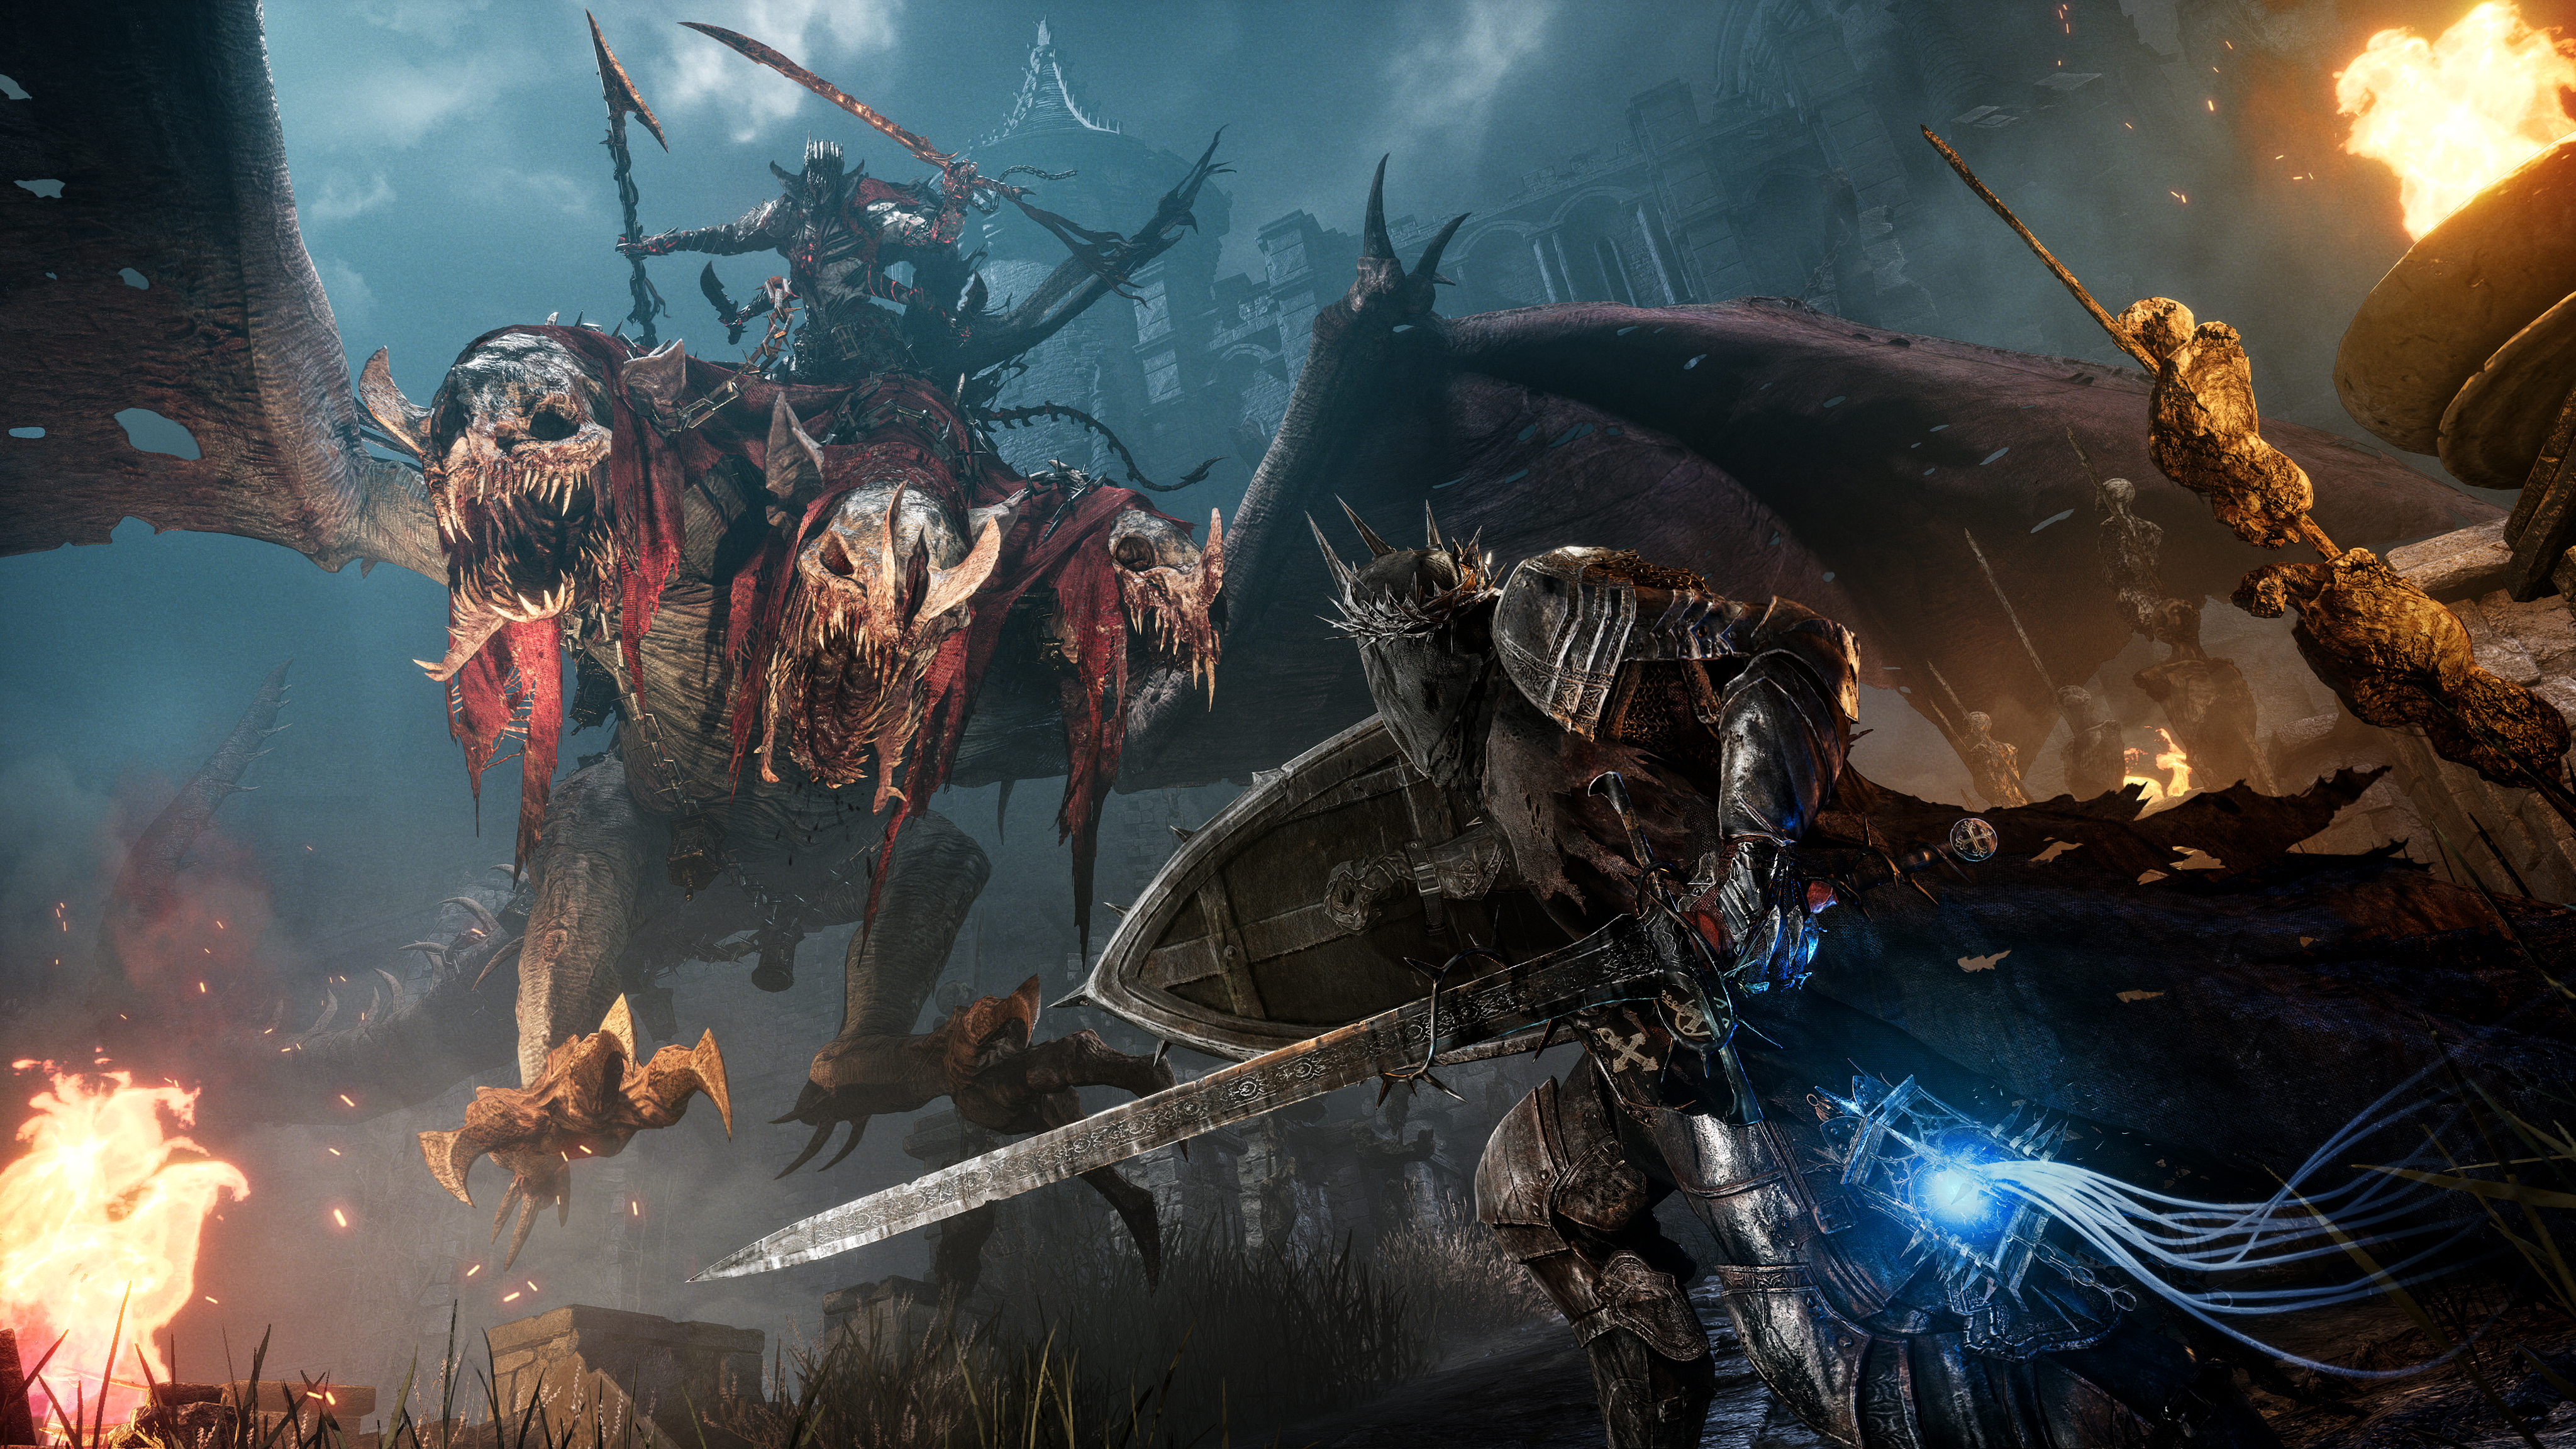 THE LORDS OF THE FALLEN TEASES FIRST GAMEPLAY AT THE GAME AWARDS